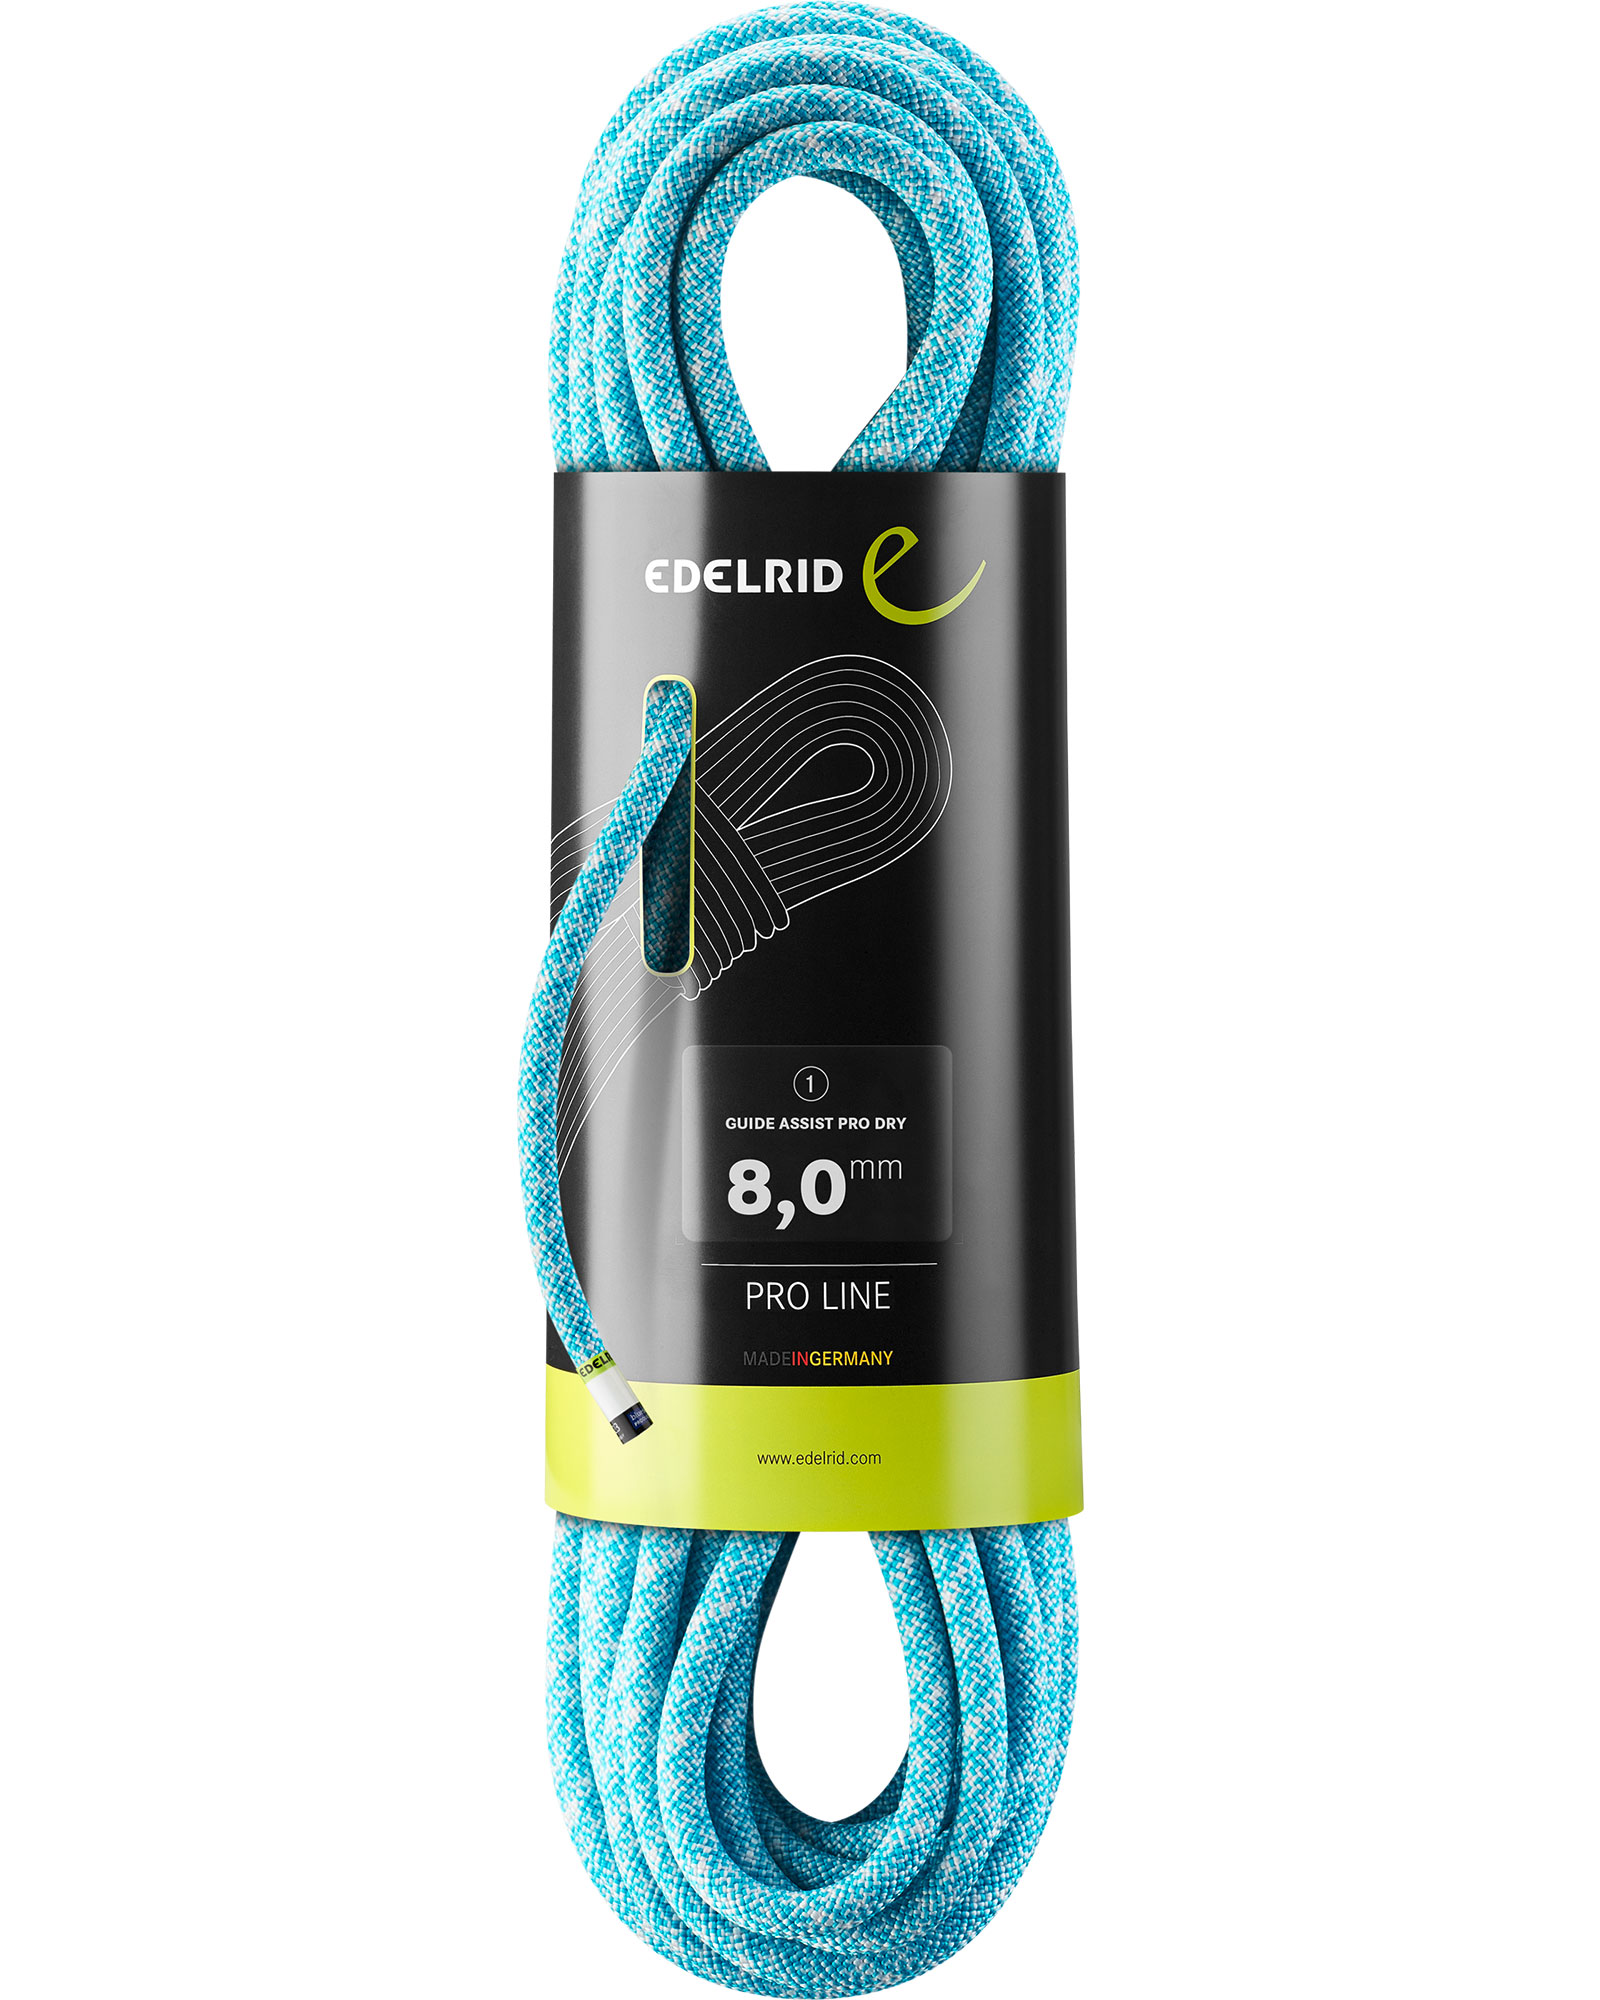 Edelrid Guide Assist Pro Dry 8.0 X 30 Rope